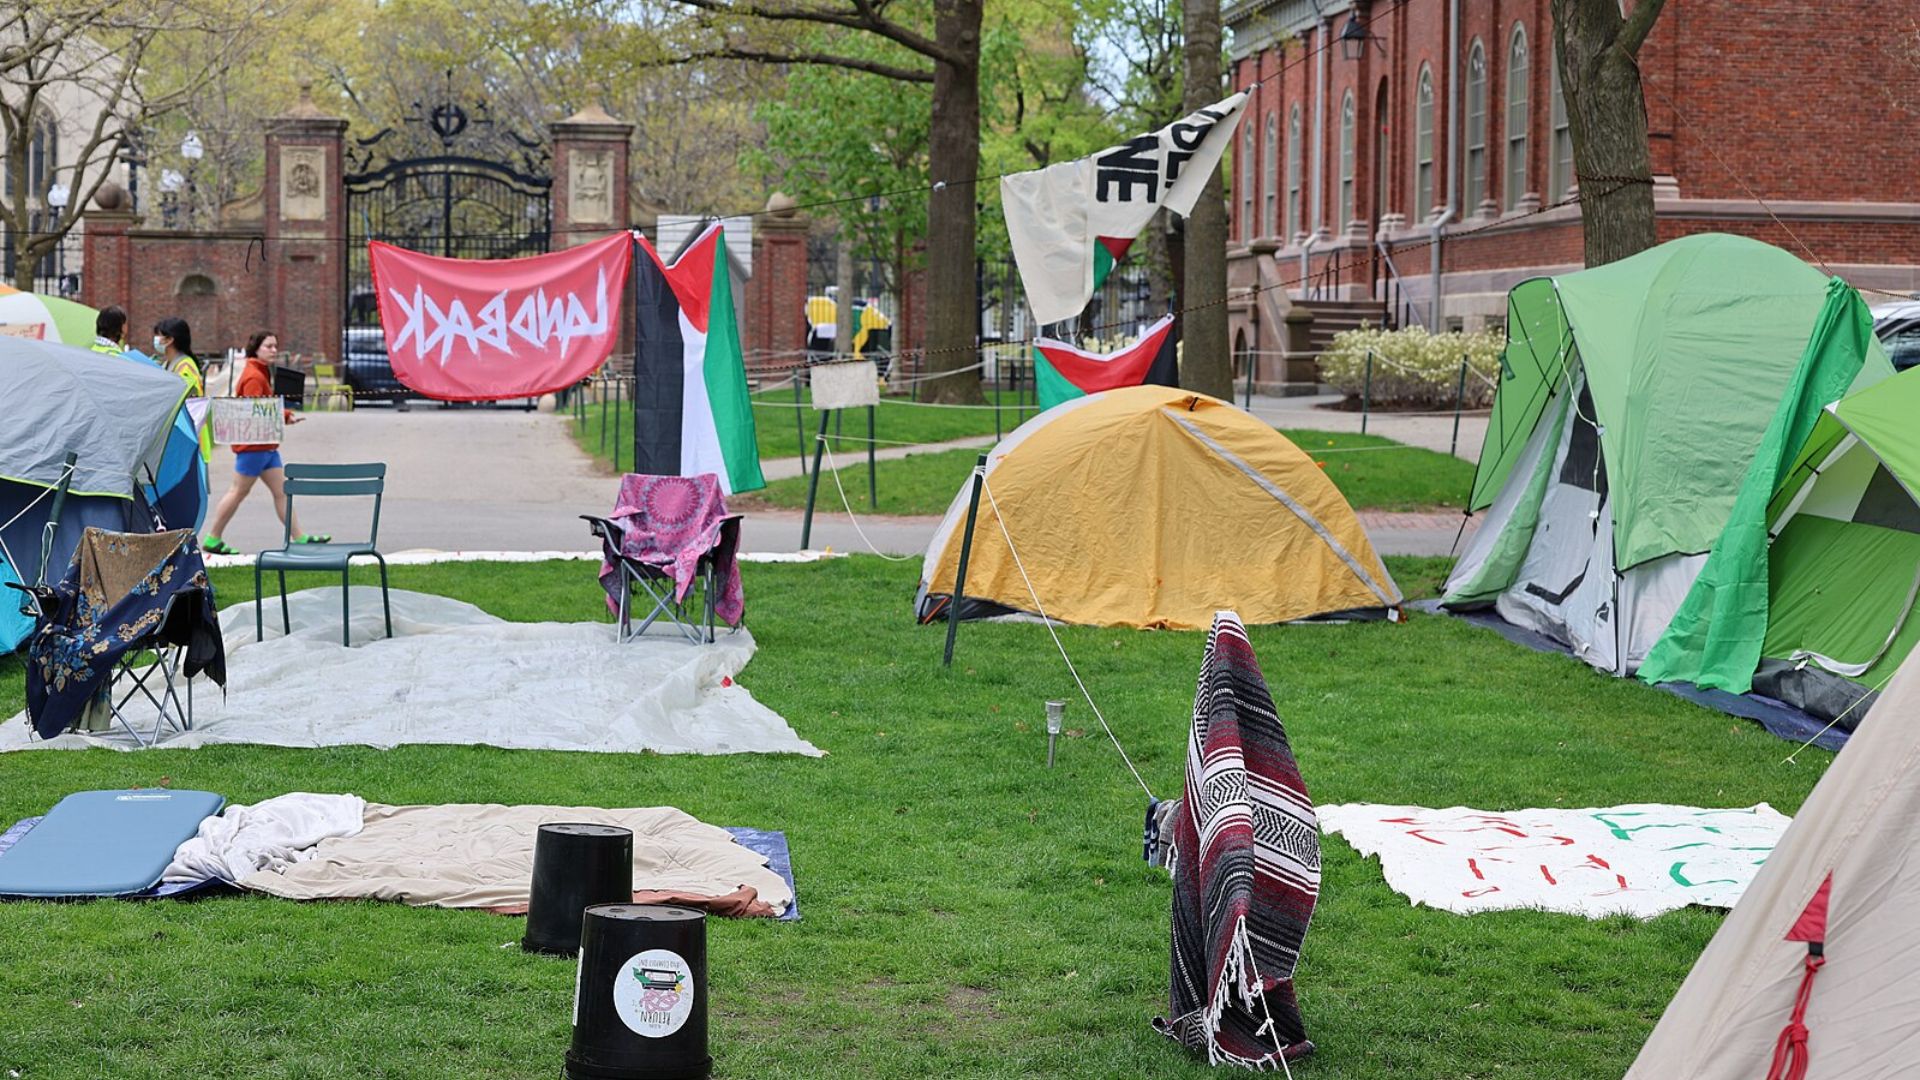 <p>Protestors <a href="https://www.nbcnews.com/news/us-news/students-walk-harvard-college-graduation-ucla-contends-new-protest-rcna153822">expressed</a> disappointment, believing that an agreement would have allowed them to graduate.  </p> <p>This misunderstanding added to the sense of injustice felt by those who participated in the walkout.     </p>